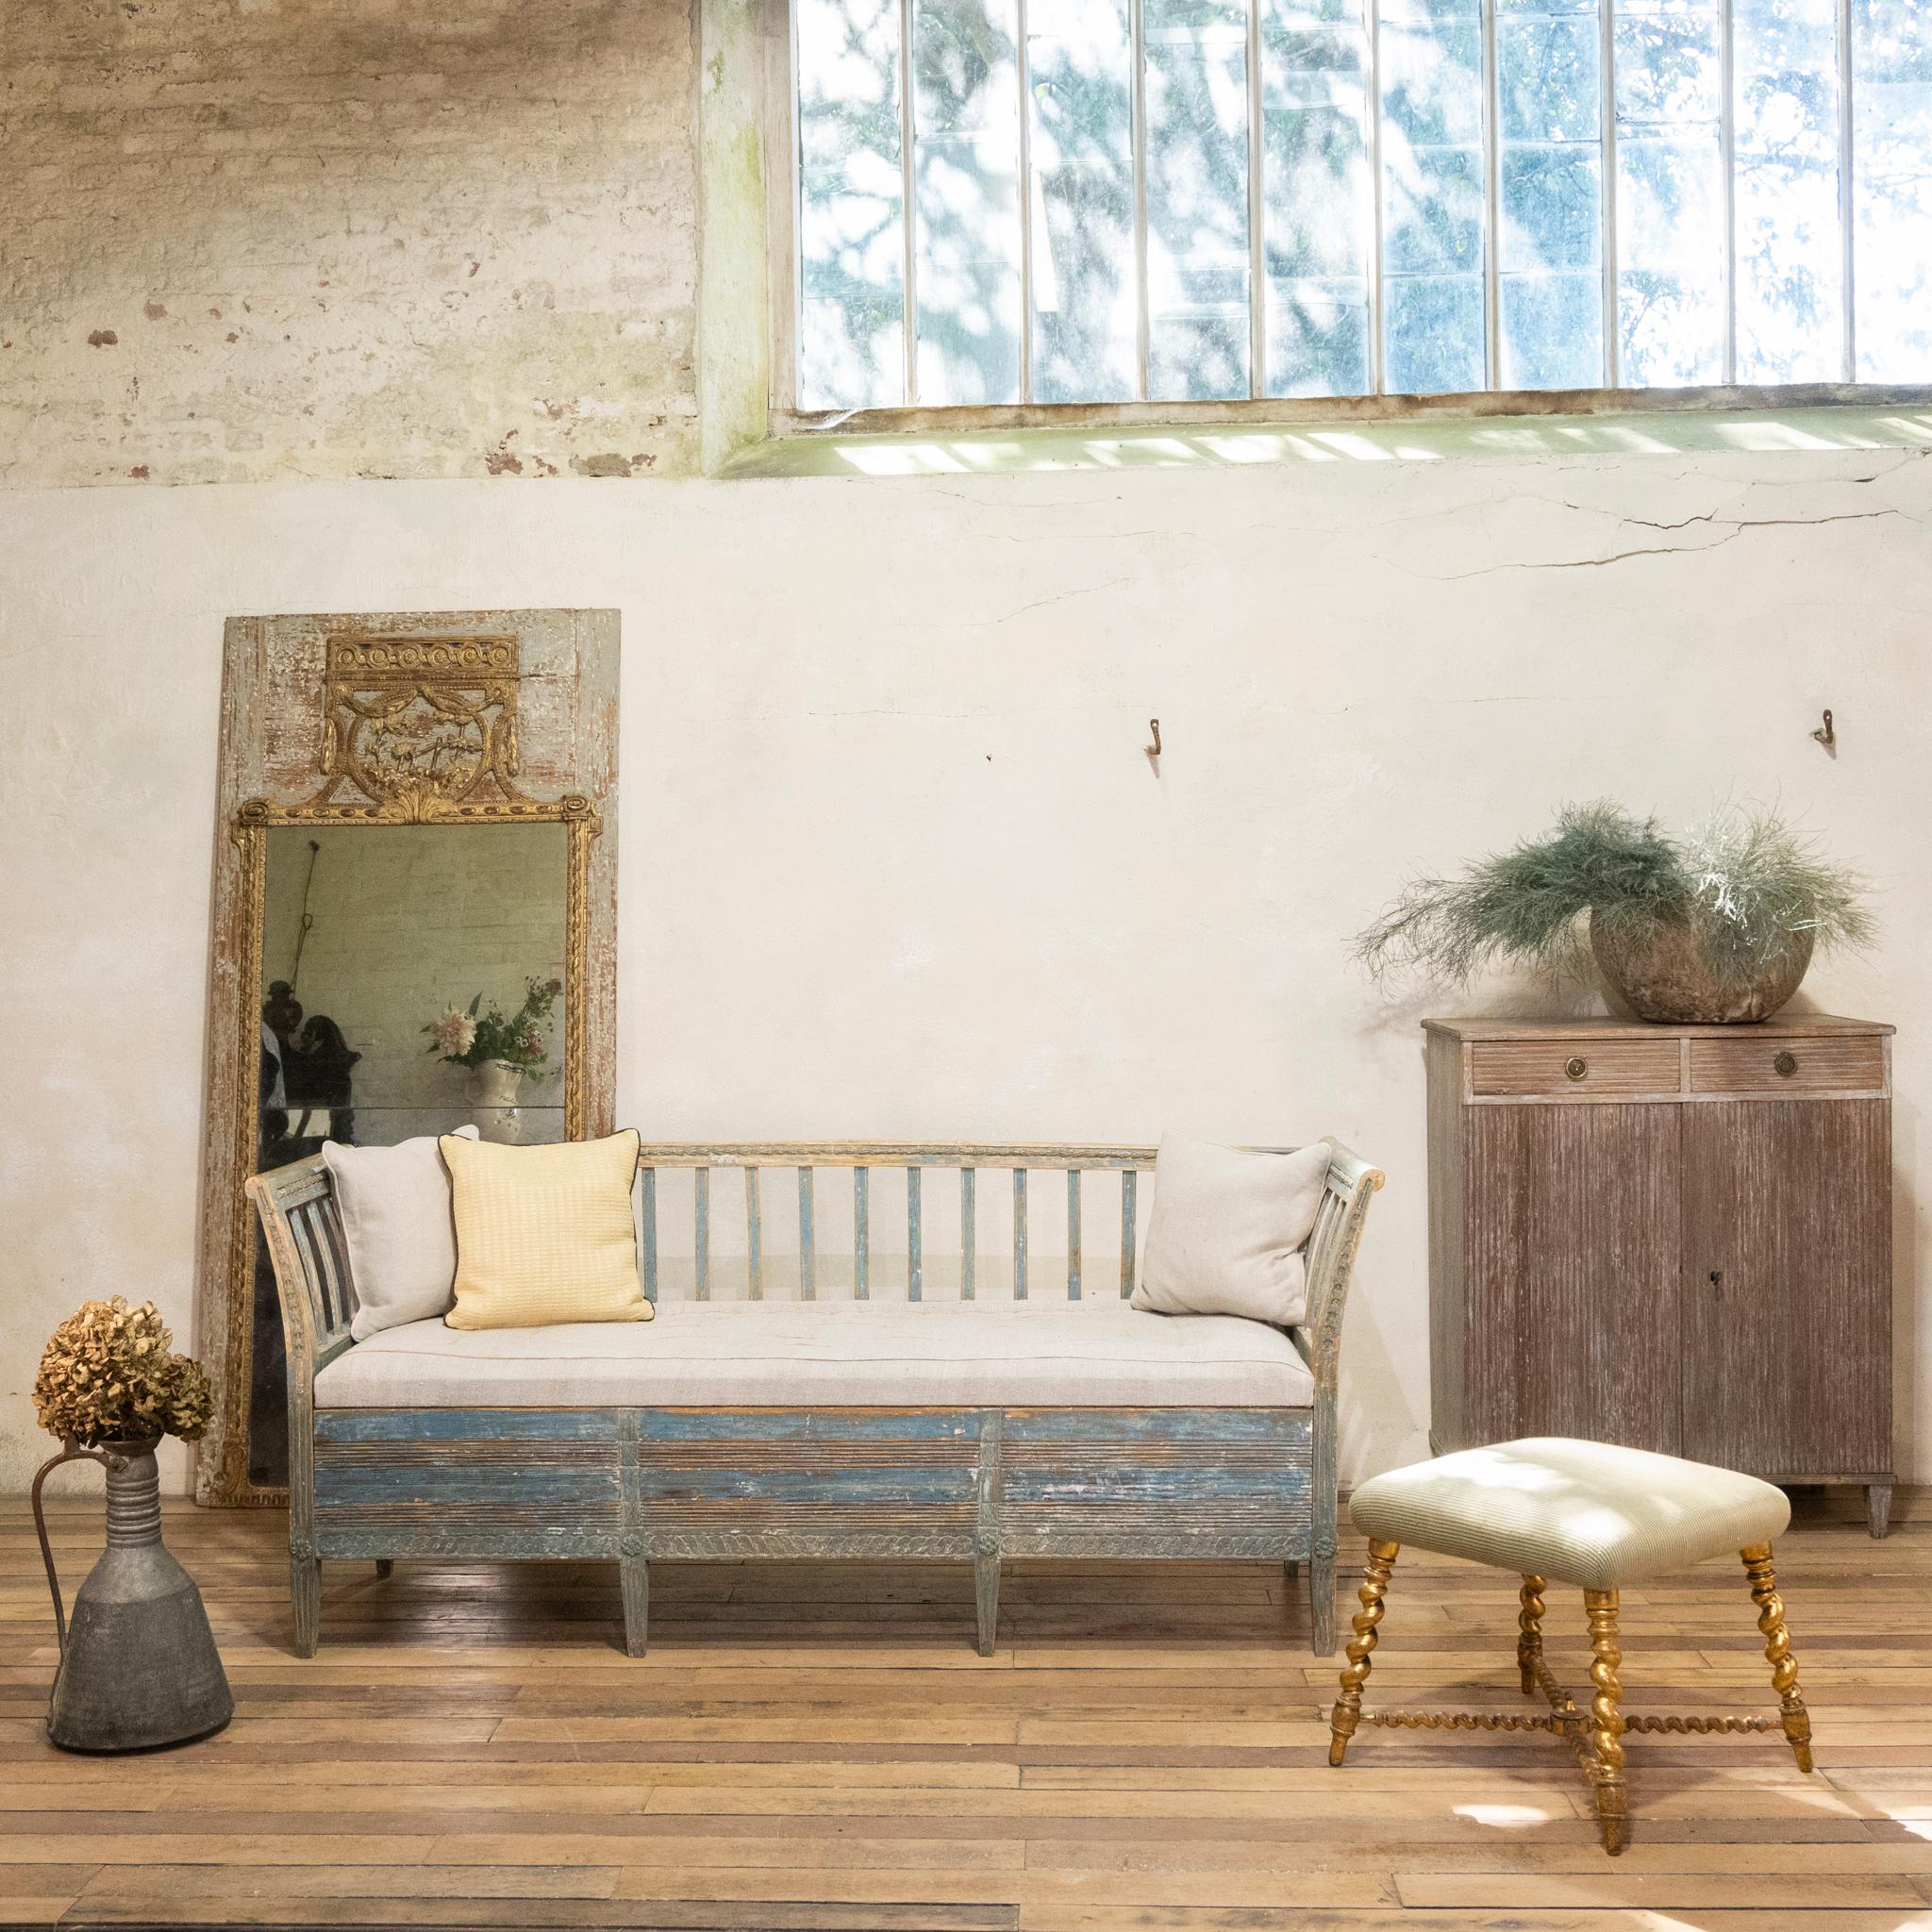 A striking 18th-century Swedish sofa - bench, displaying dry scraped original blue paint. Demonstrating gracefully splayed arms with elegant spindles to the back, displaying carved detailing throughout. The sofa features a pull out base - ideal for